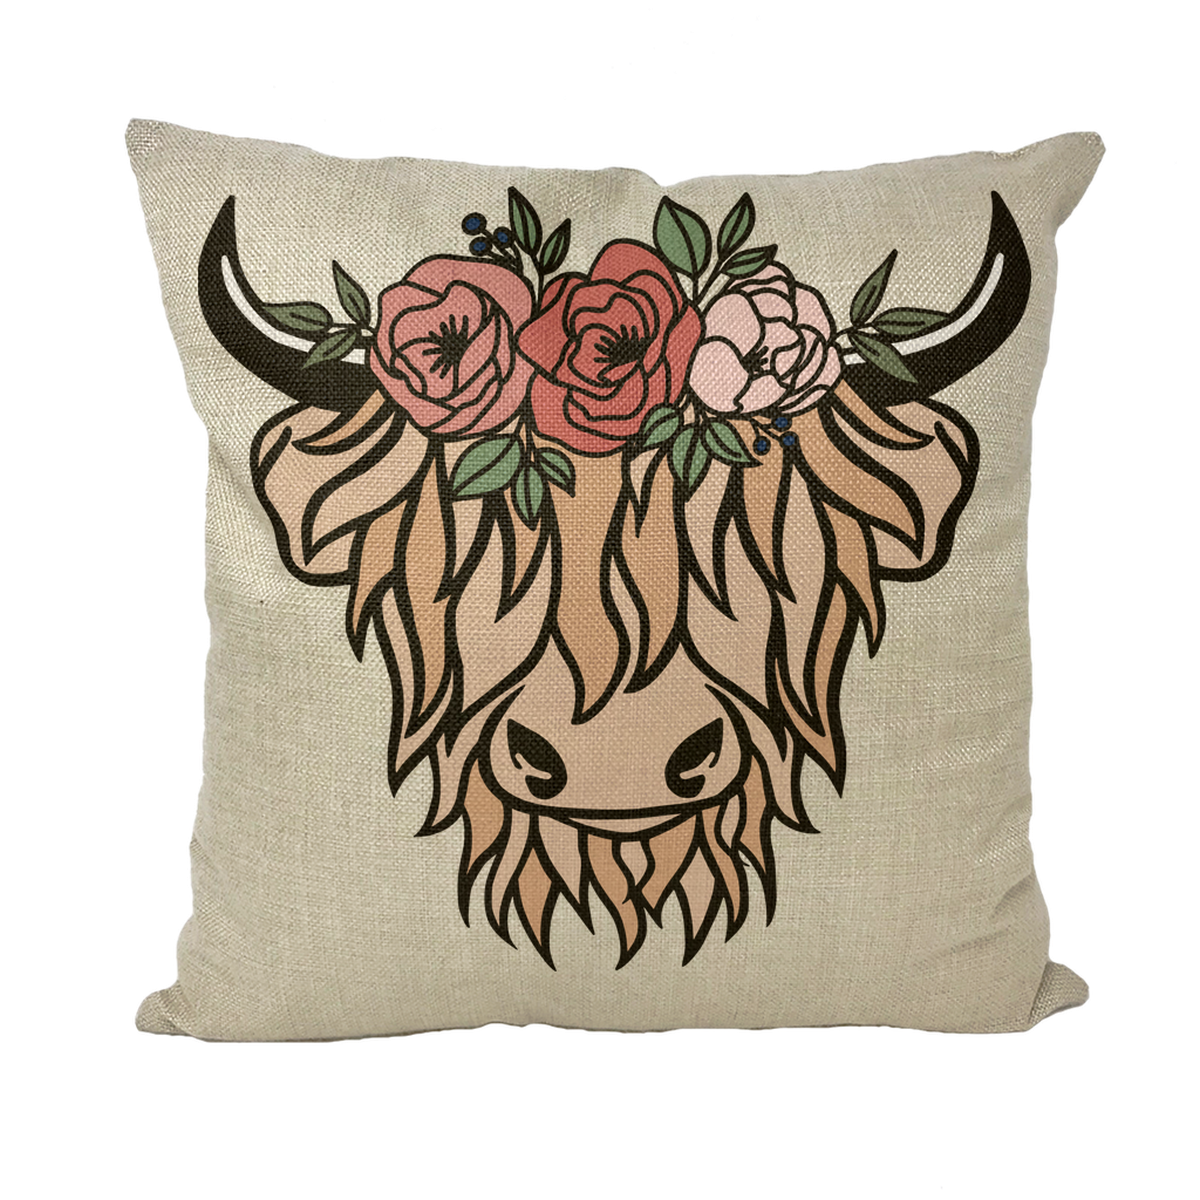 Highland Cow in a Flower Crown Throw cushion covers